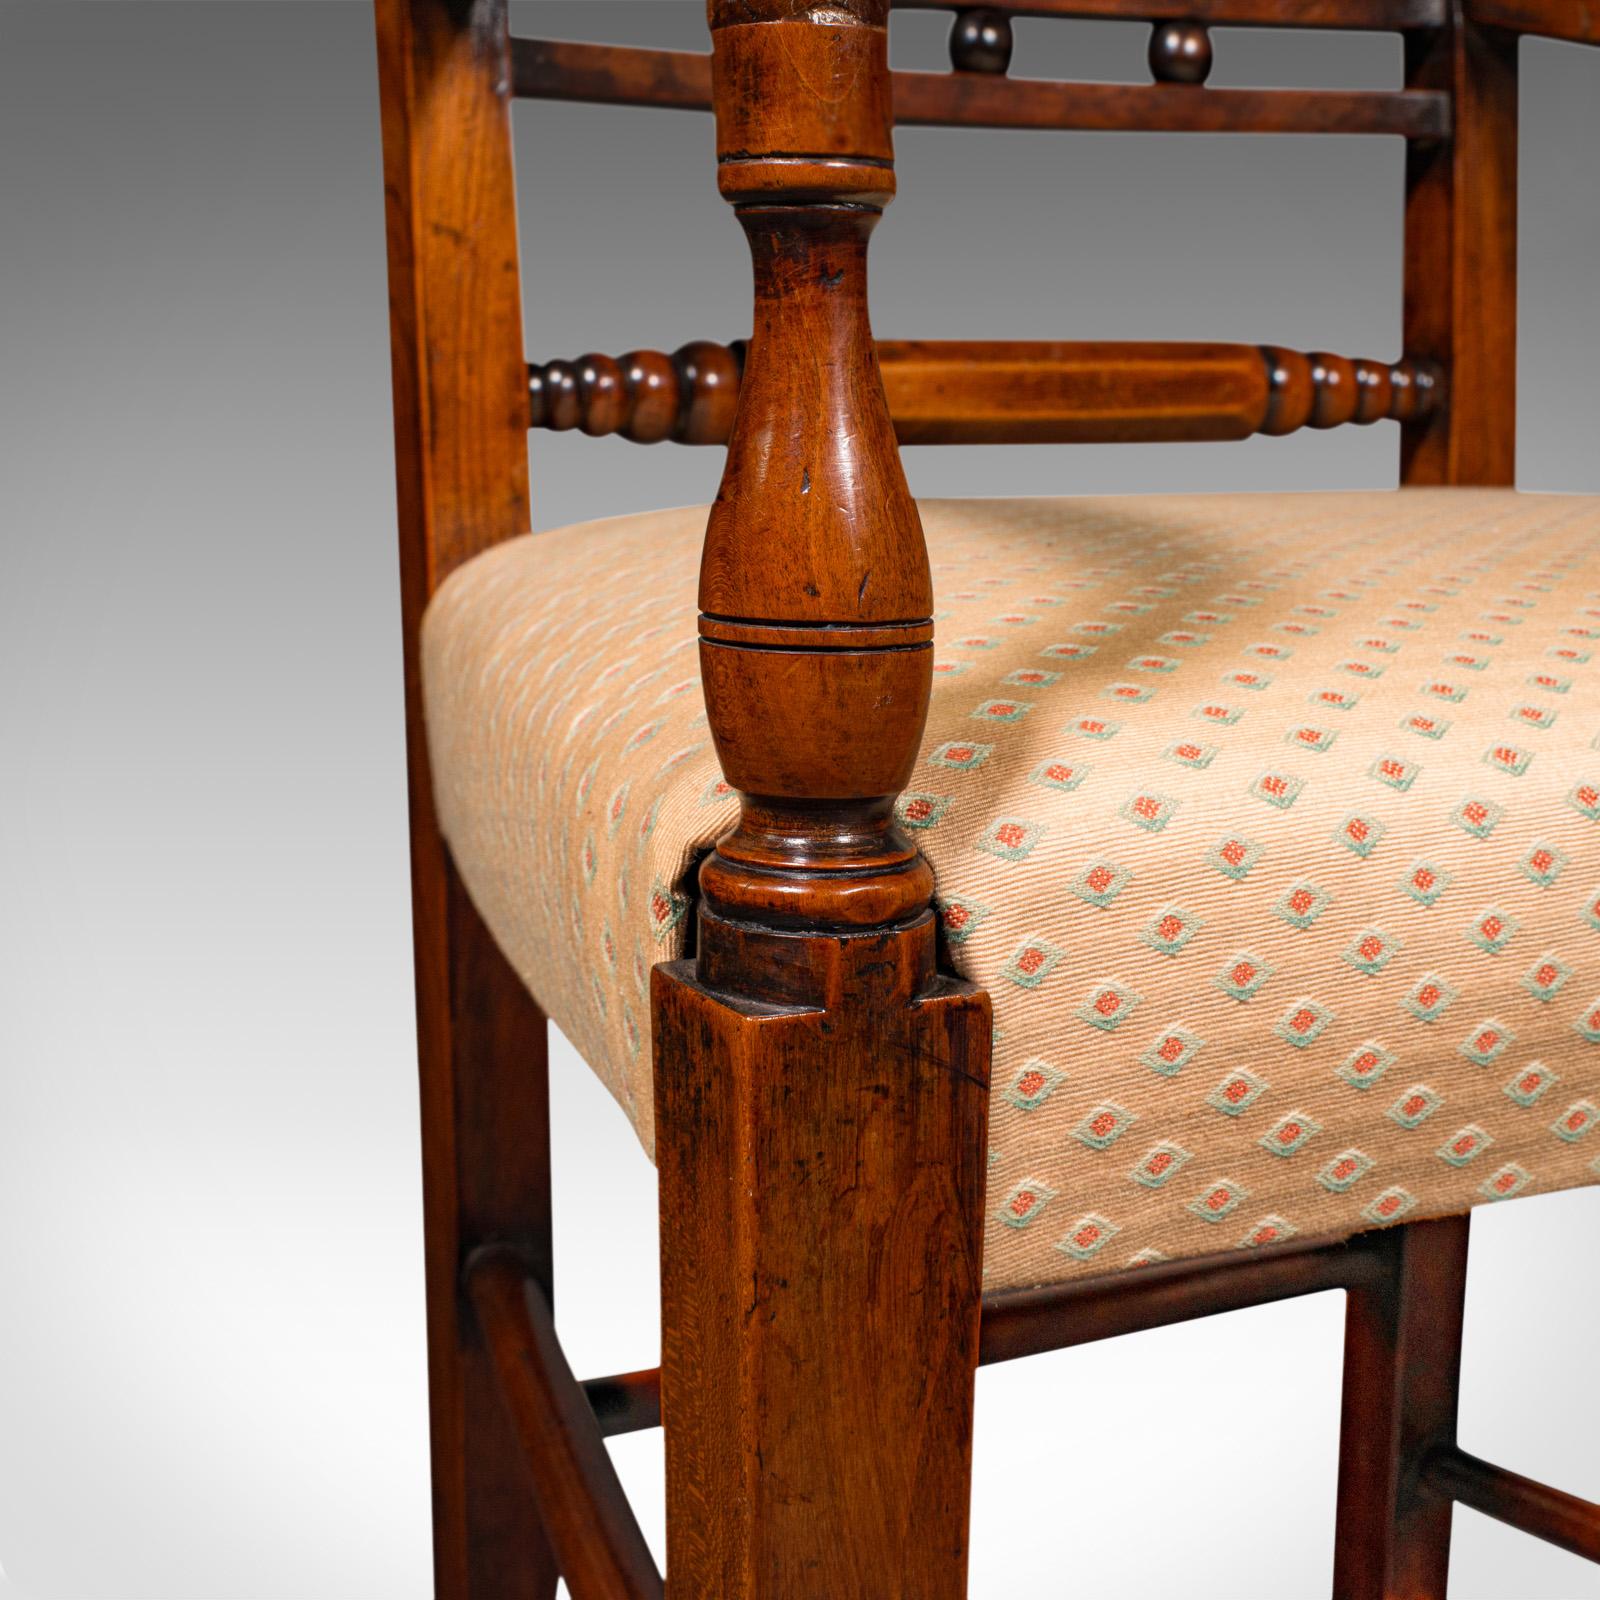 Antique Elbow Chair, English, Fruitwood, Office, Desk Seat, Victorian, C.1870 For Sale 5